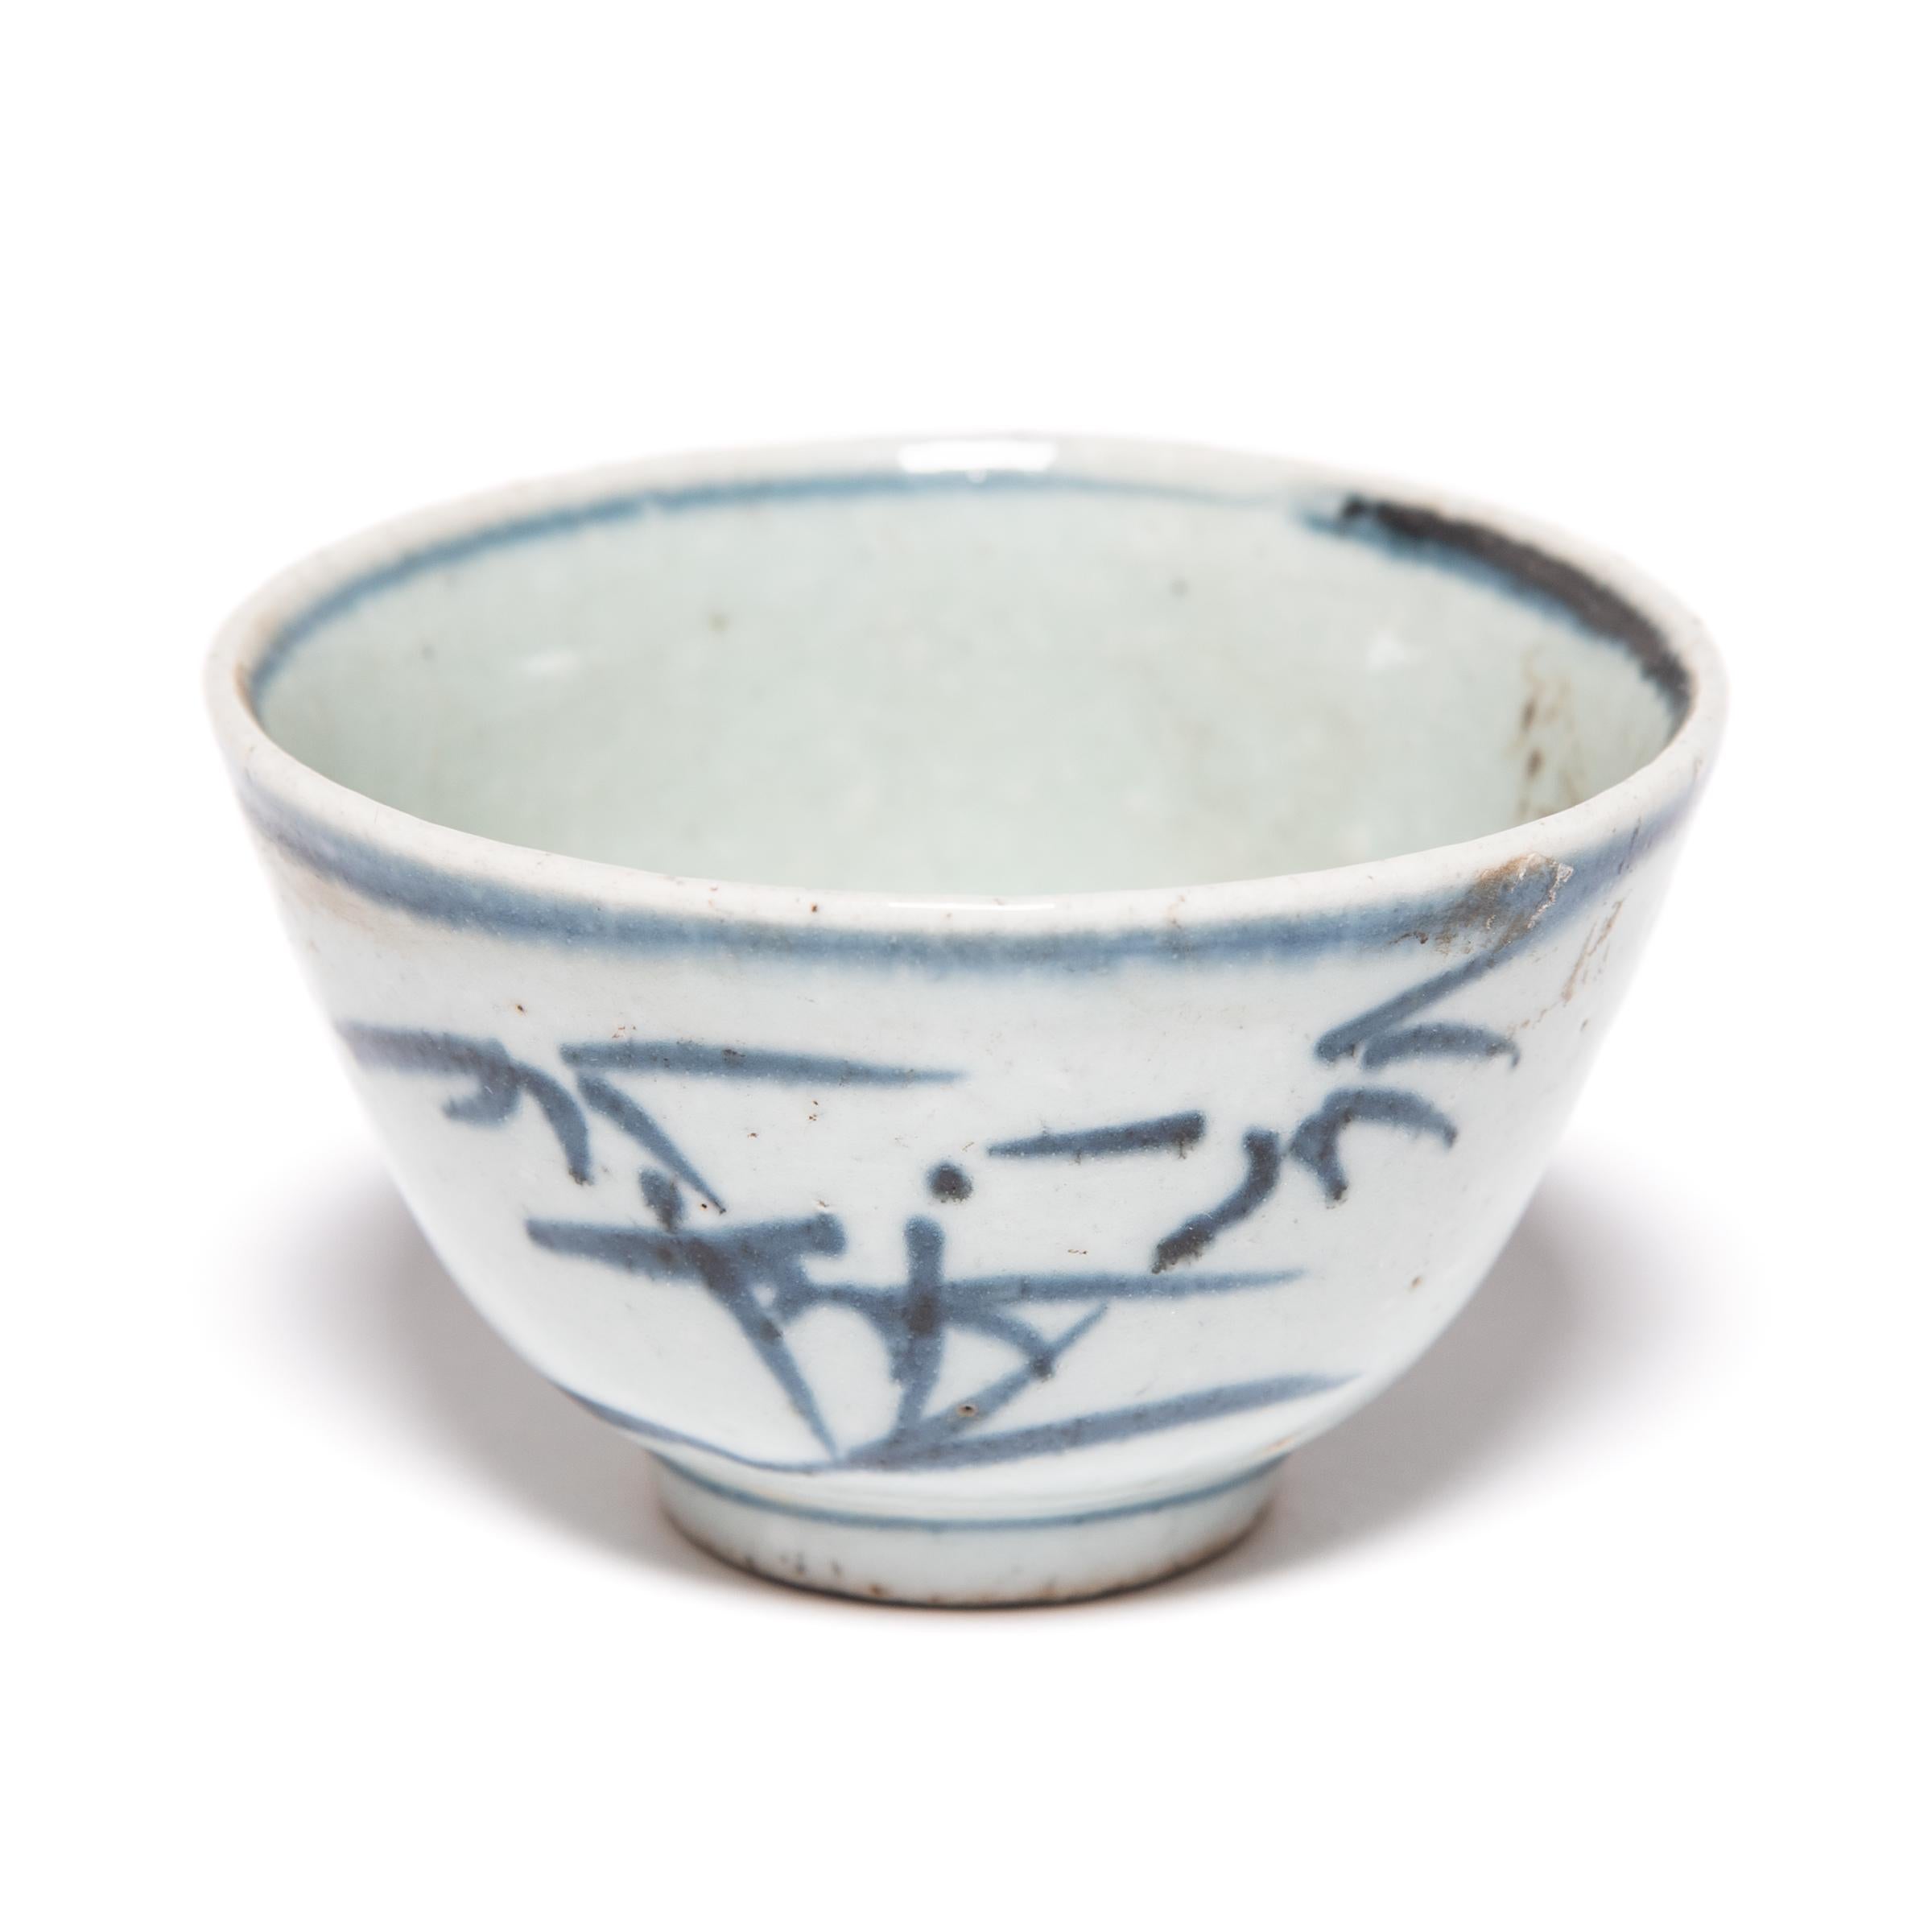 The delicate blue and white bamboo design of these porcelain teacups was painted in a muted, grey pigment, only to be transformed to a rich, cobalt blue by the fiery heat of the kiln. Retaining the immediacy of the artist’s brushwork, the design